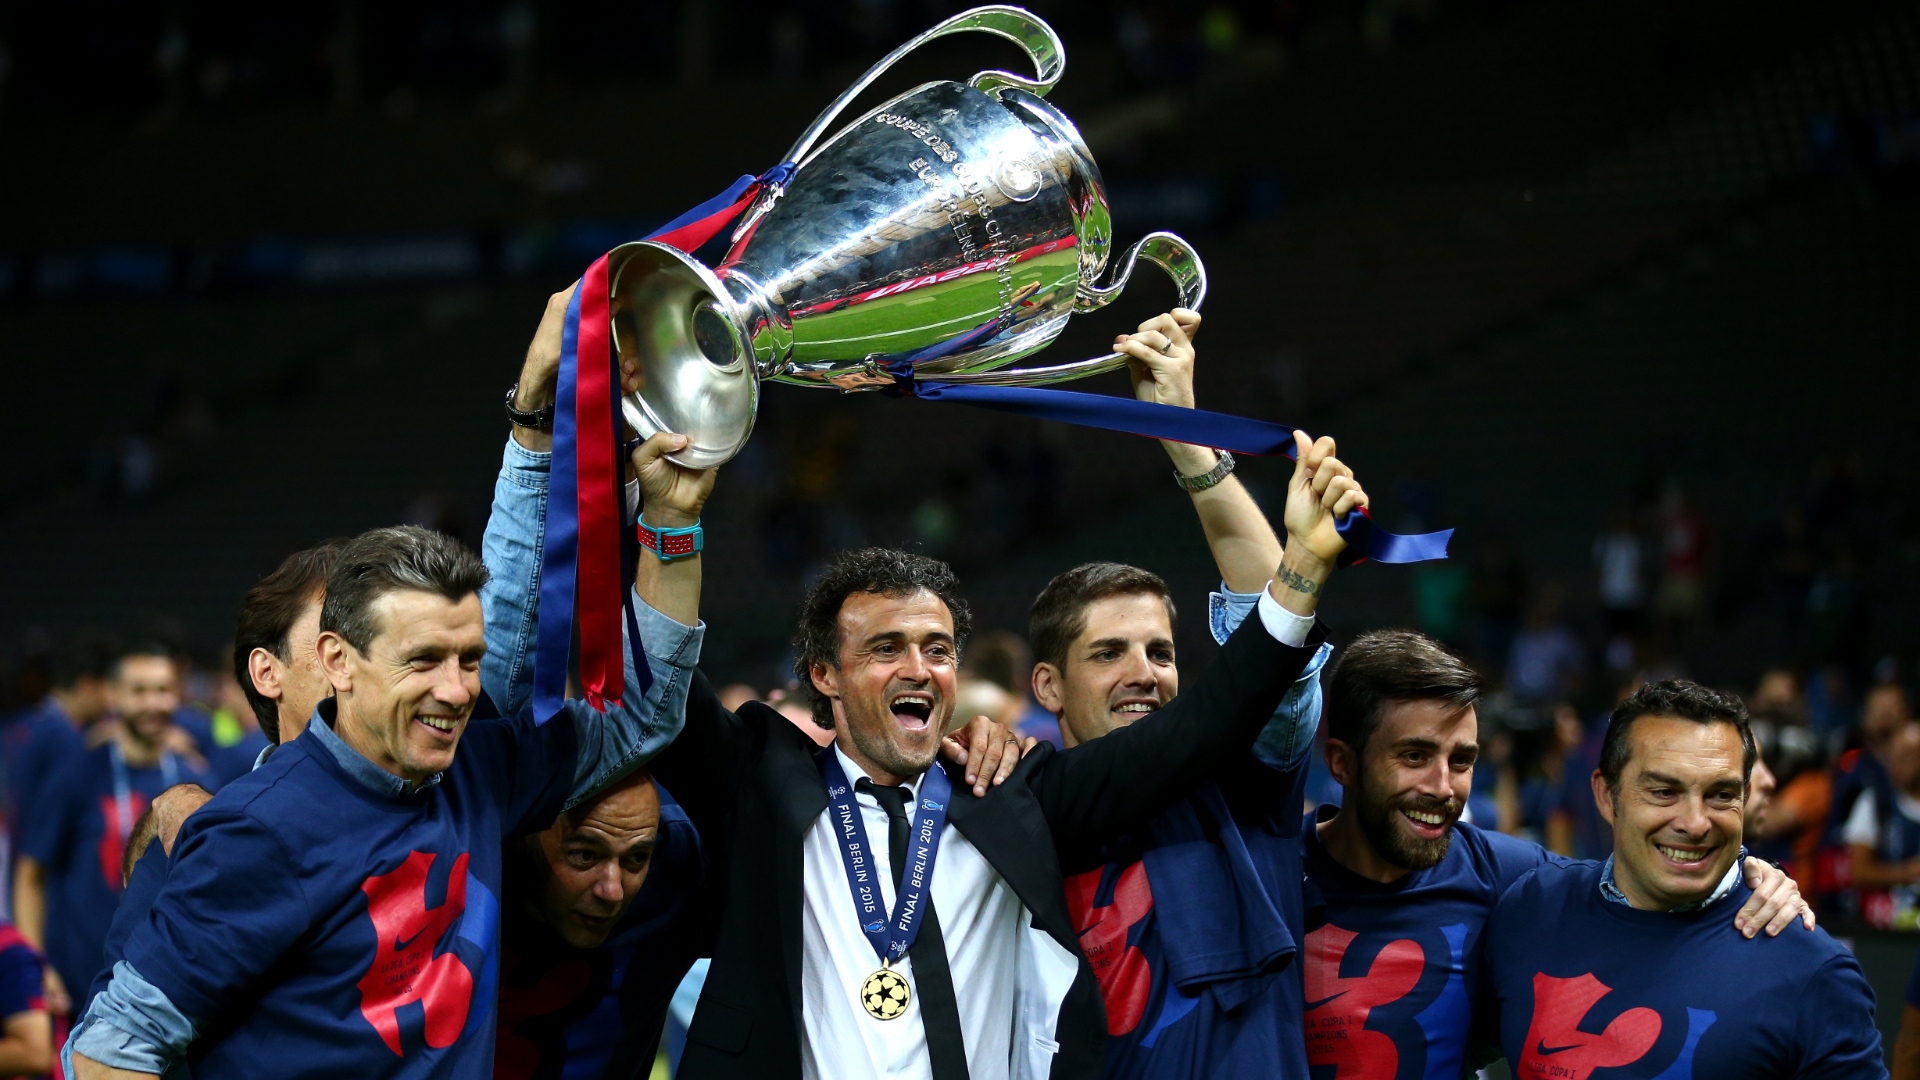 Barcelona won their second treble in June 2015 thanks to some strange words of inspiration from head coach Luis Enrique.